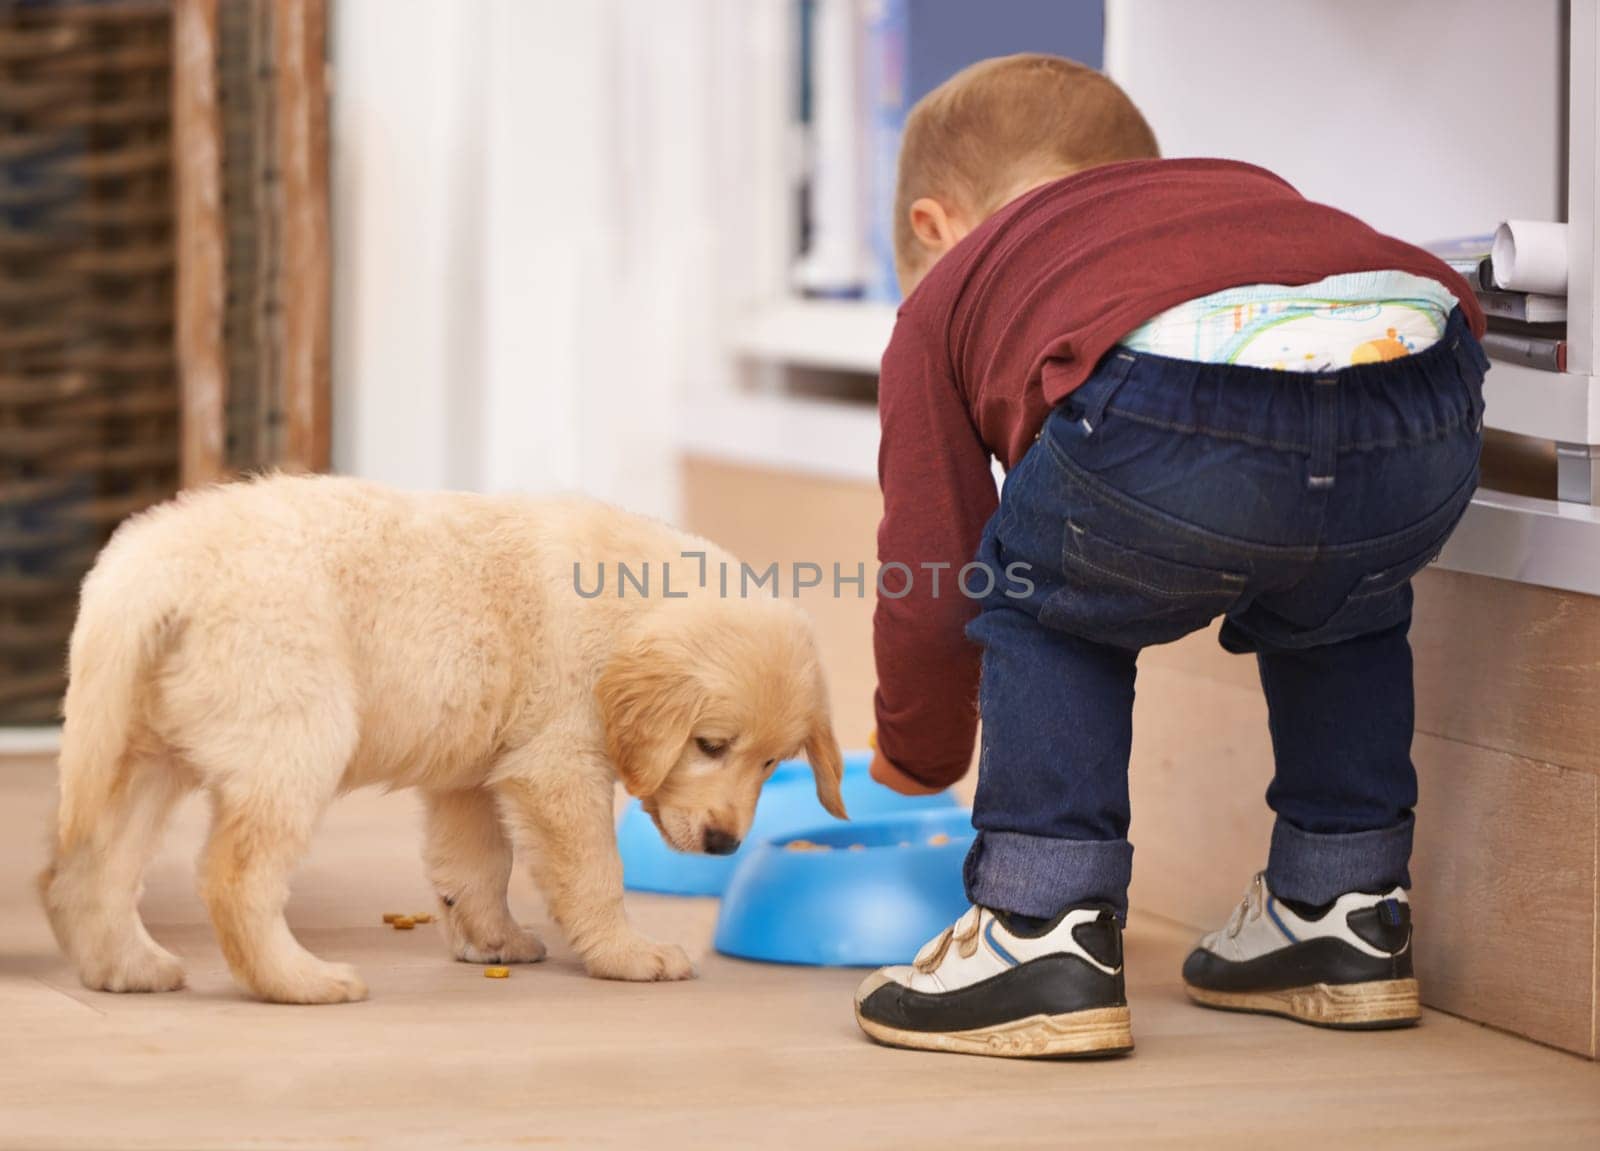 Child, puppy and bowl with home, food and pet with love at house. Kid, dog and golden retriever or hungry labrador with youth, bonding or sharing together with responsibility for animals or pets.